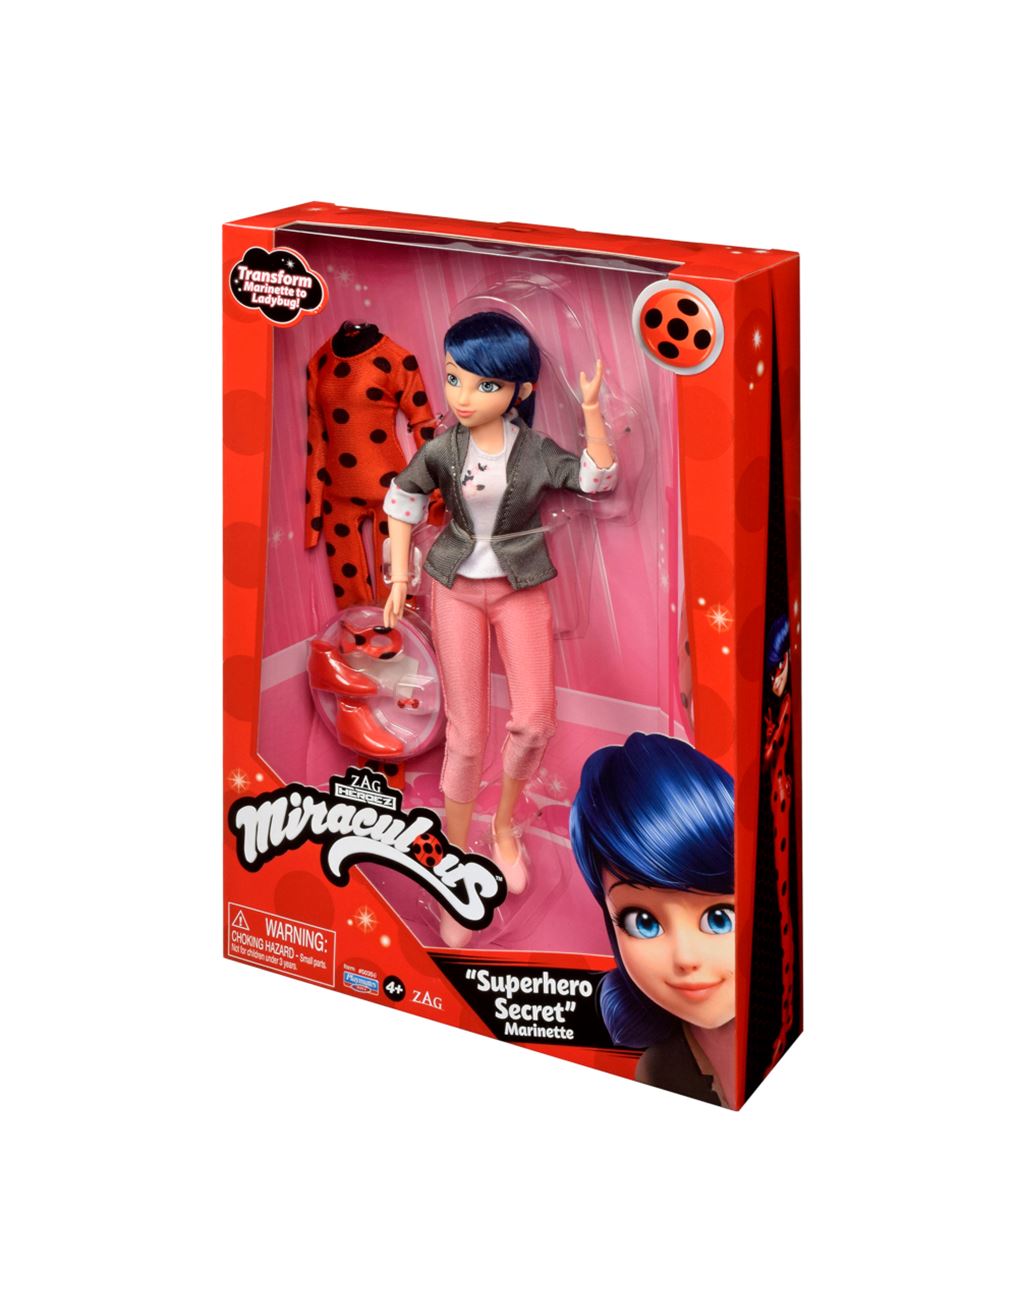 ayman el gammal recommends pictures of marinette from miraculous ladybug pic